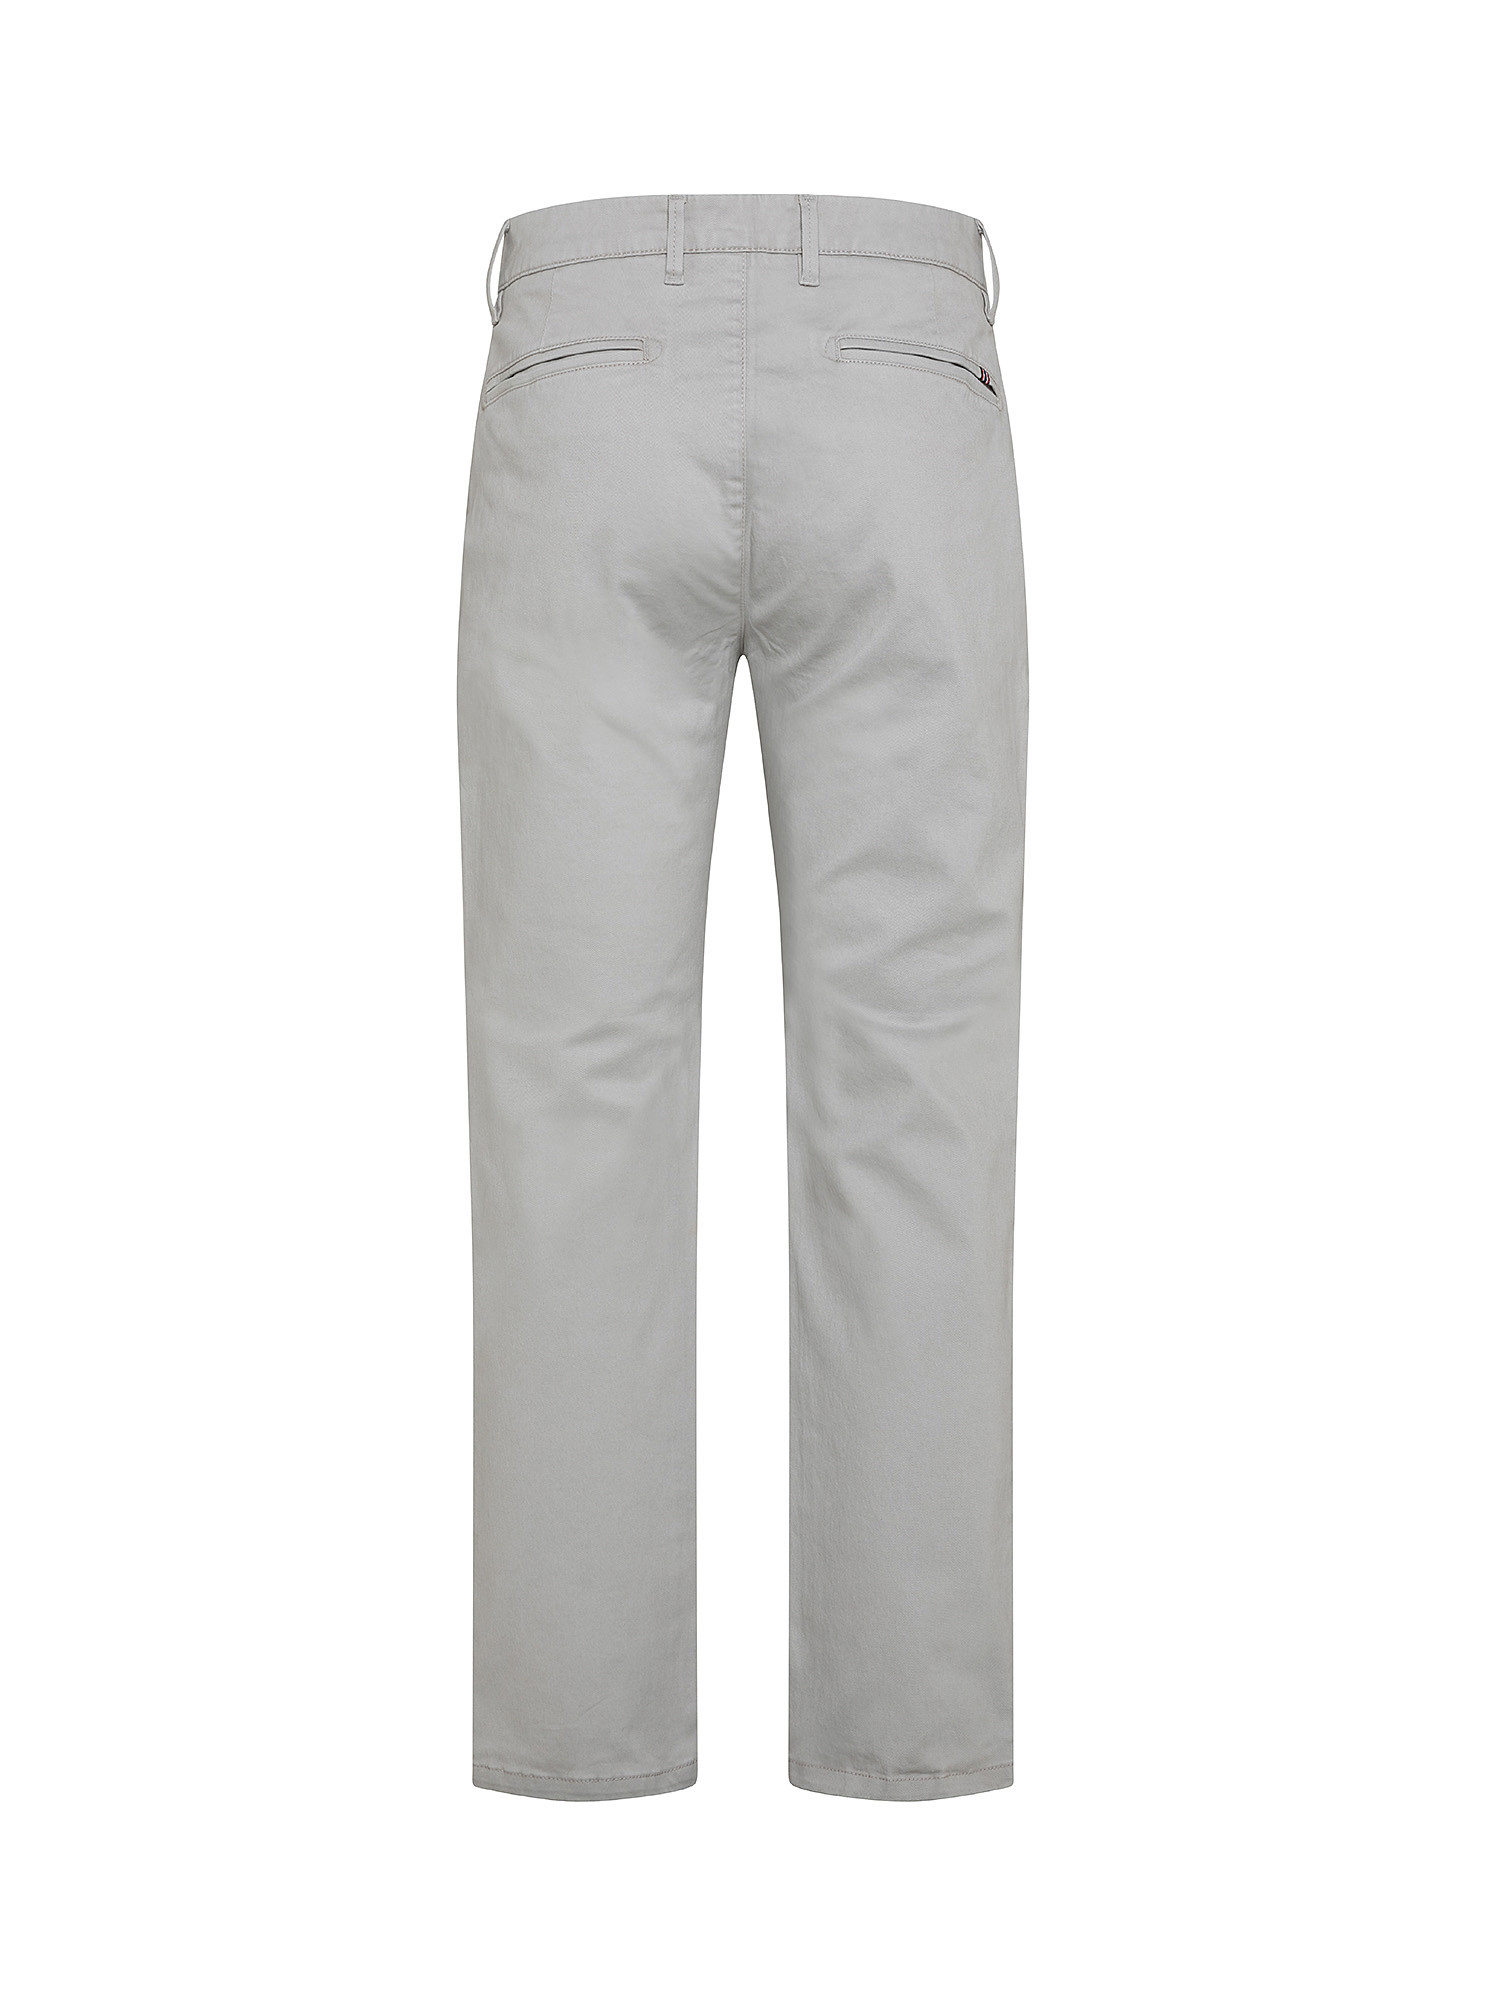 Stretch cotton chinos trousers, Pearl Grey, large image number 1